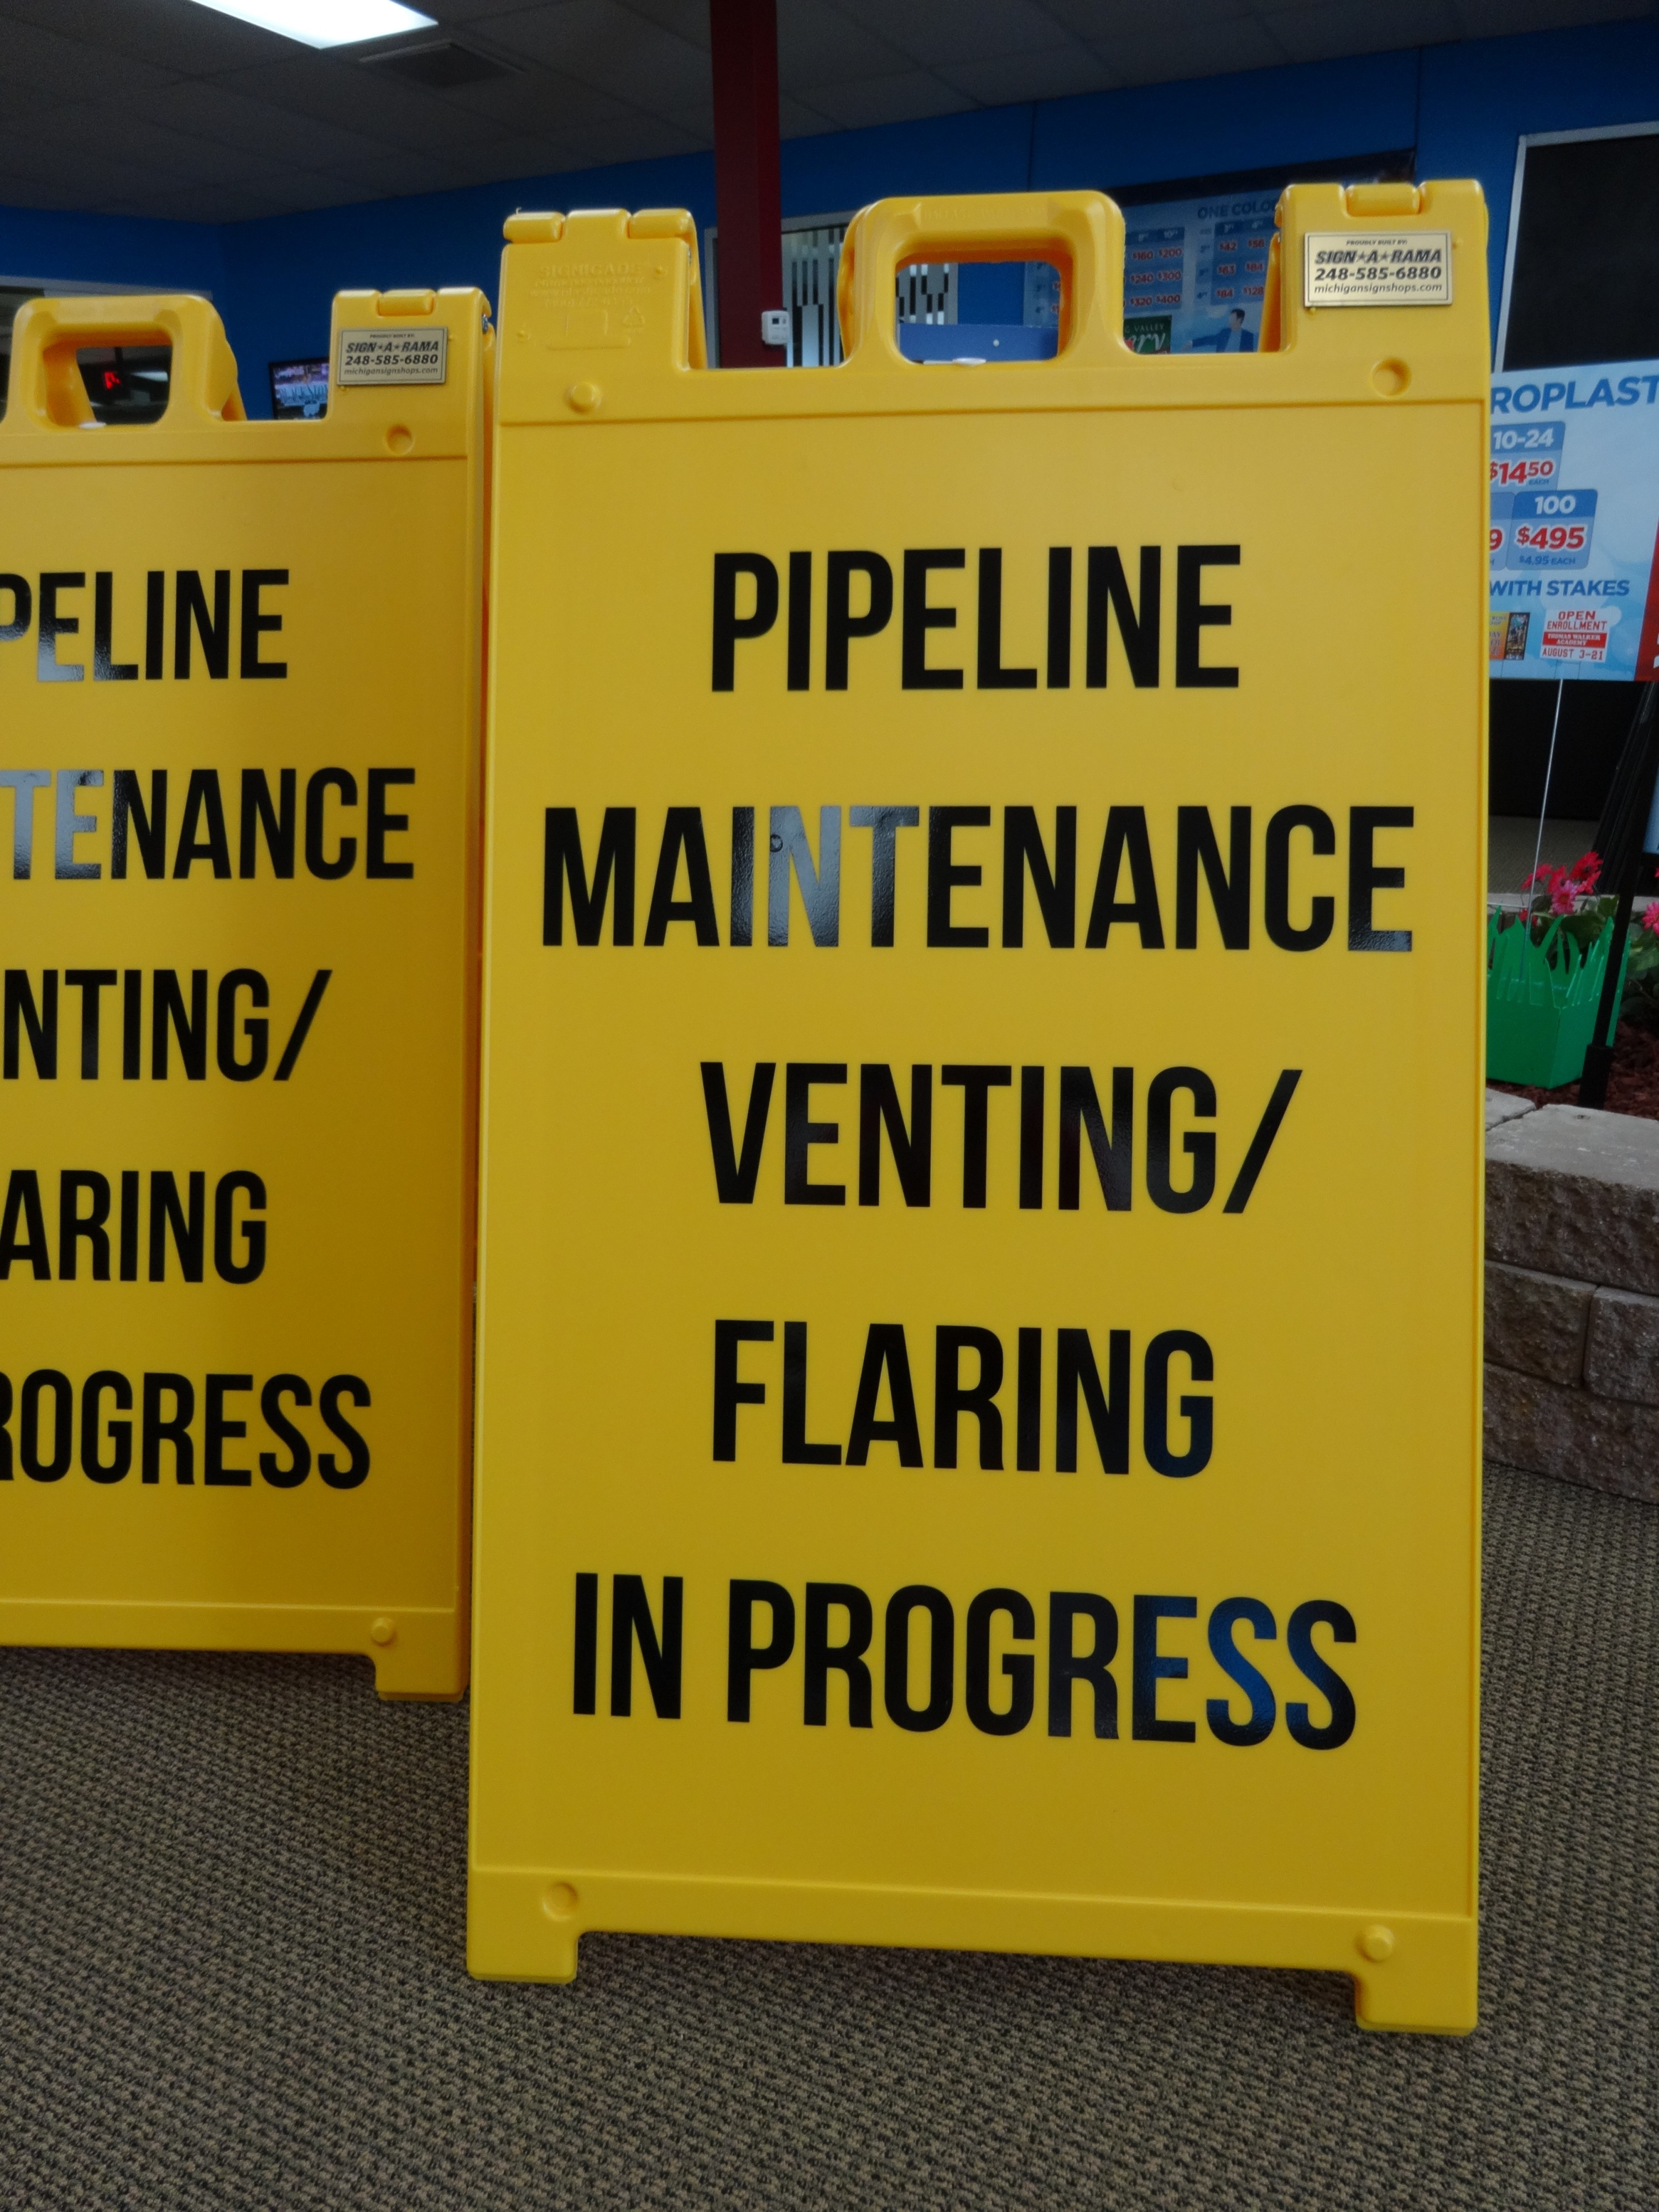 Where can I have temporary construction signs made?